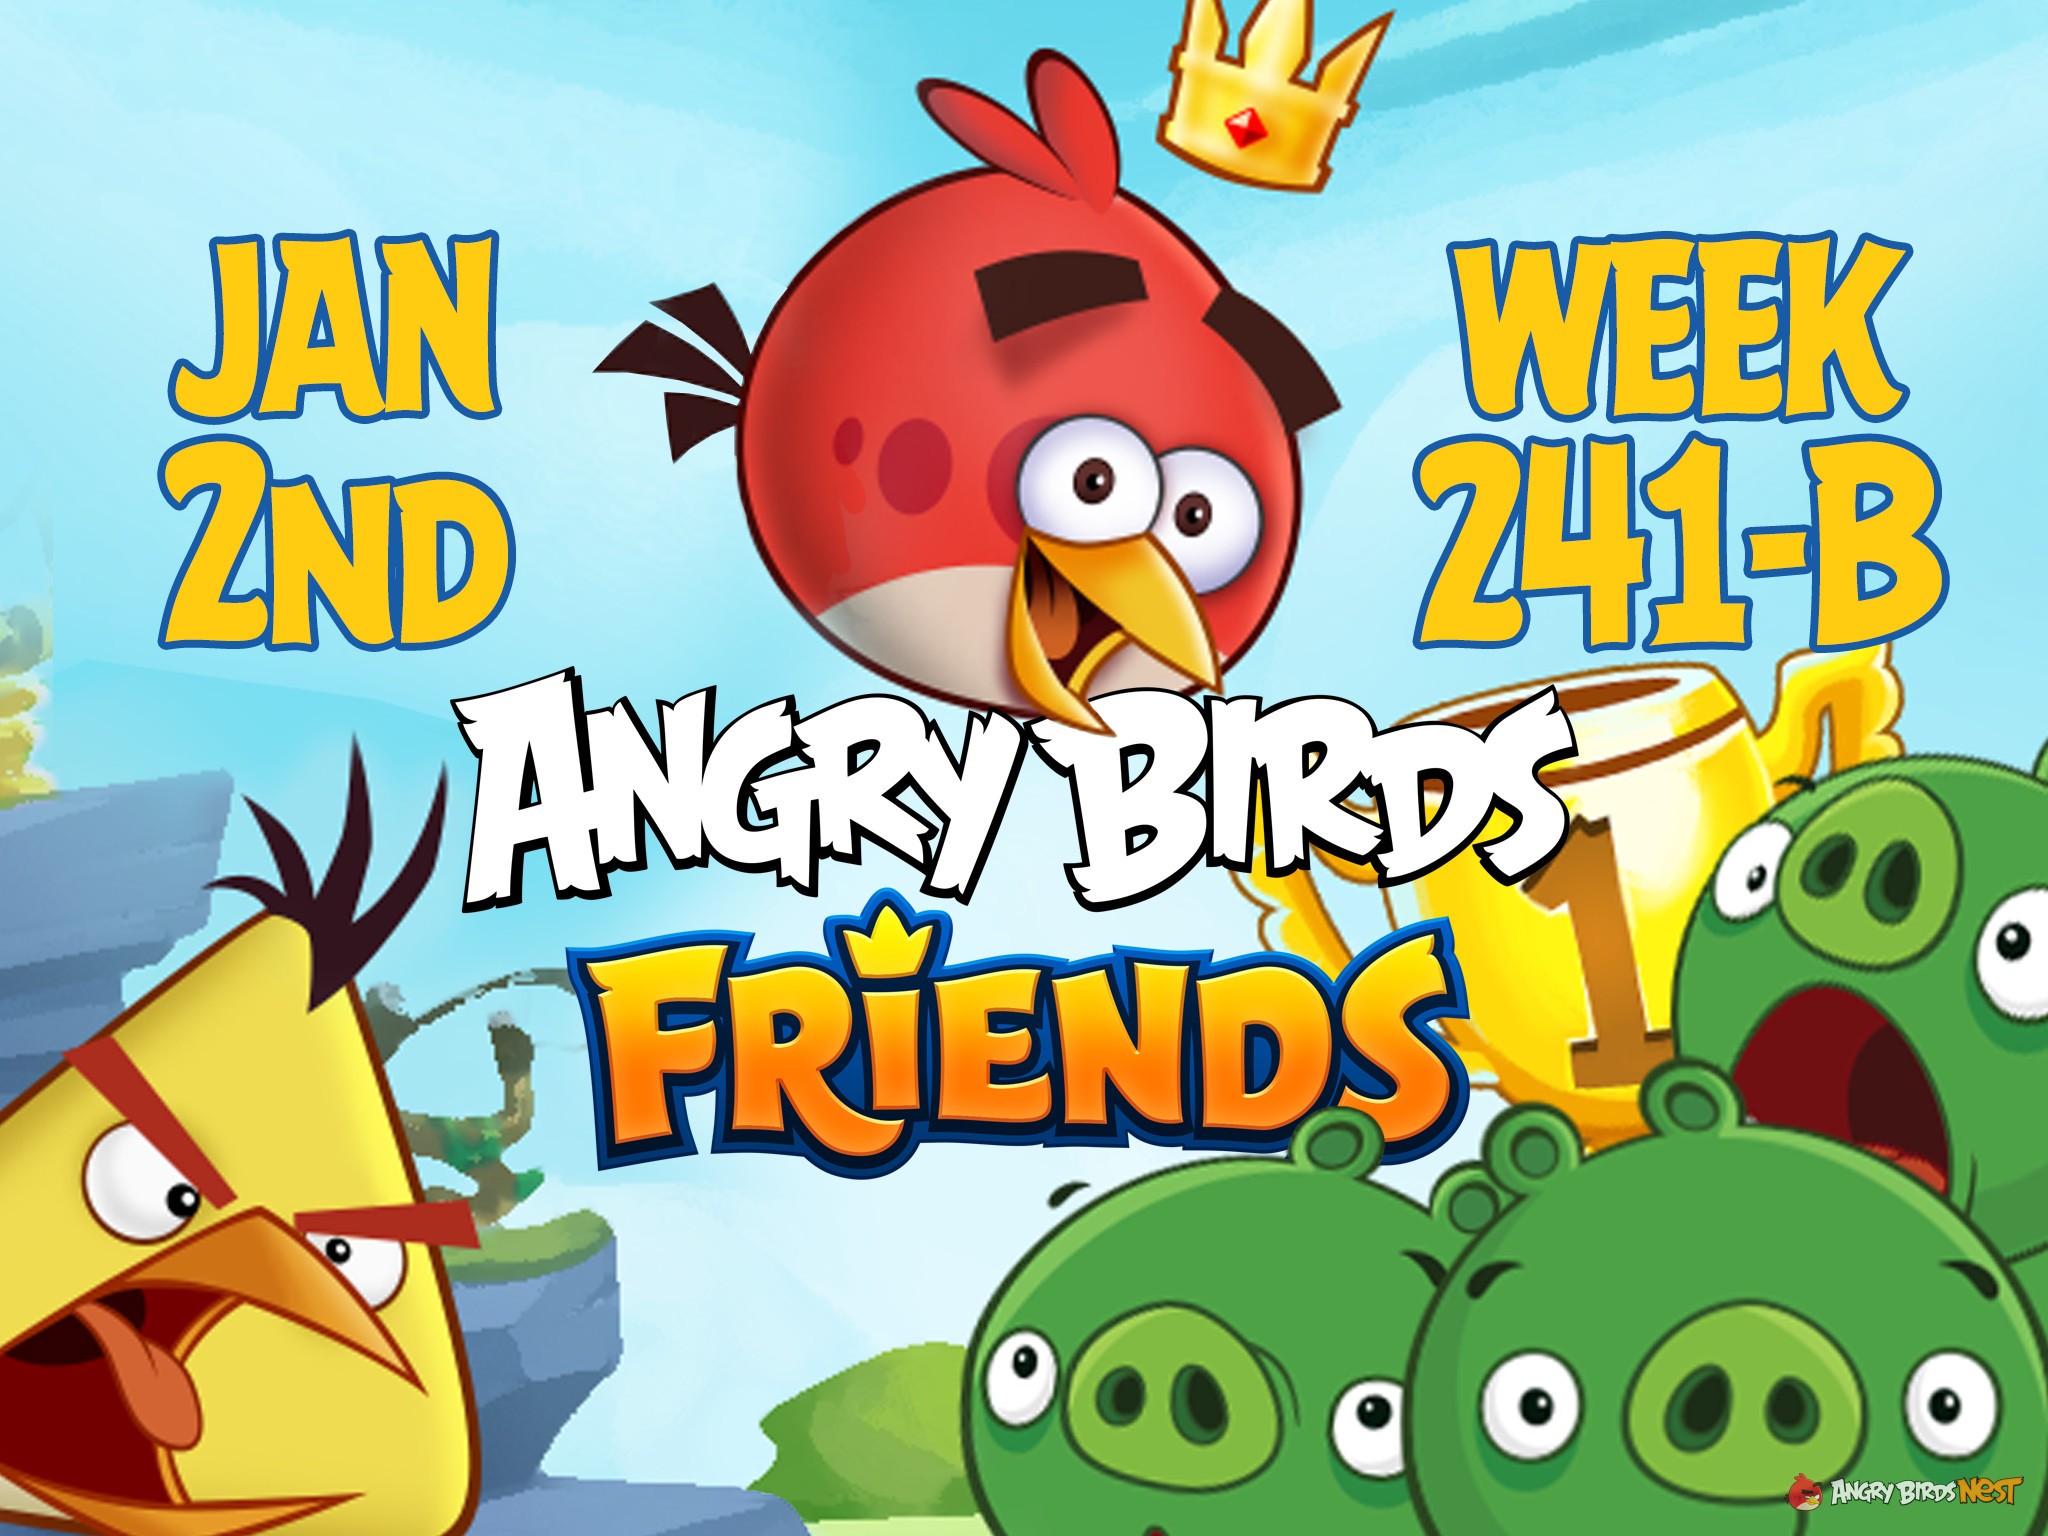 Angry Birds Friends Tournament Week 241-B Feature Image